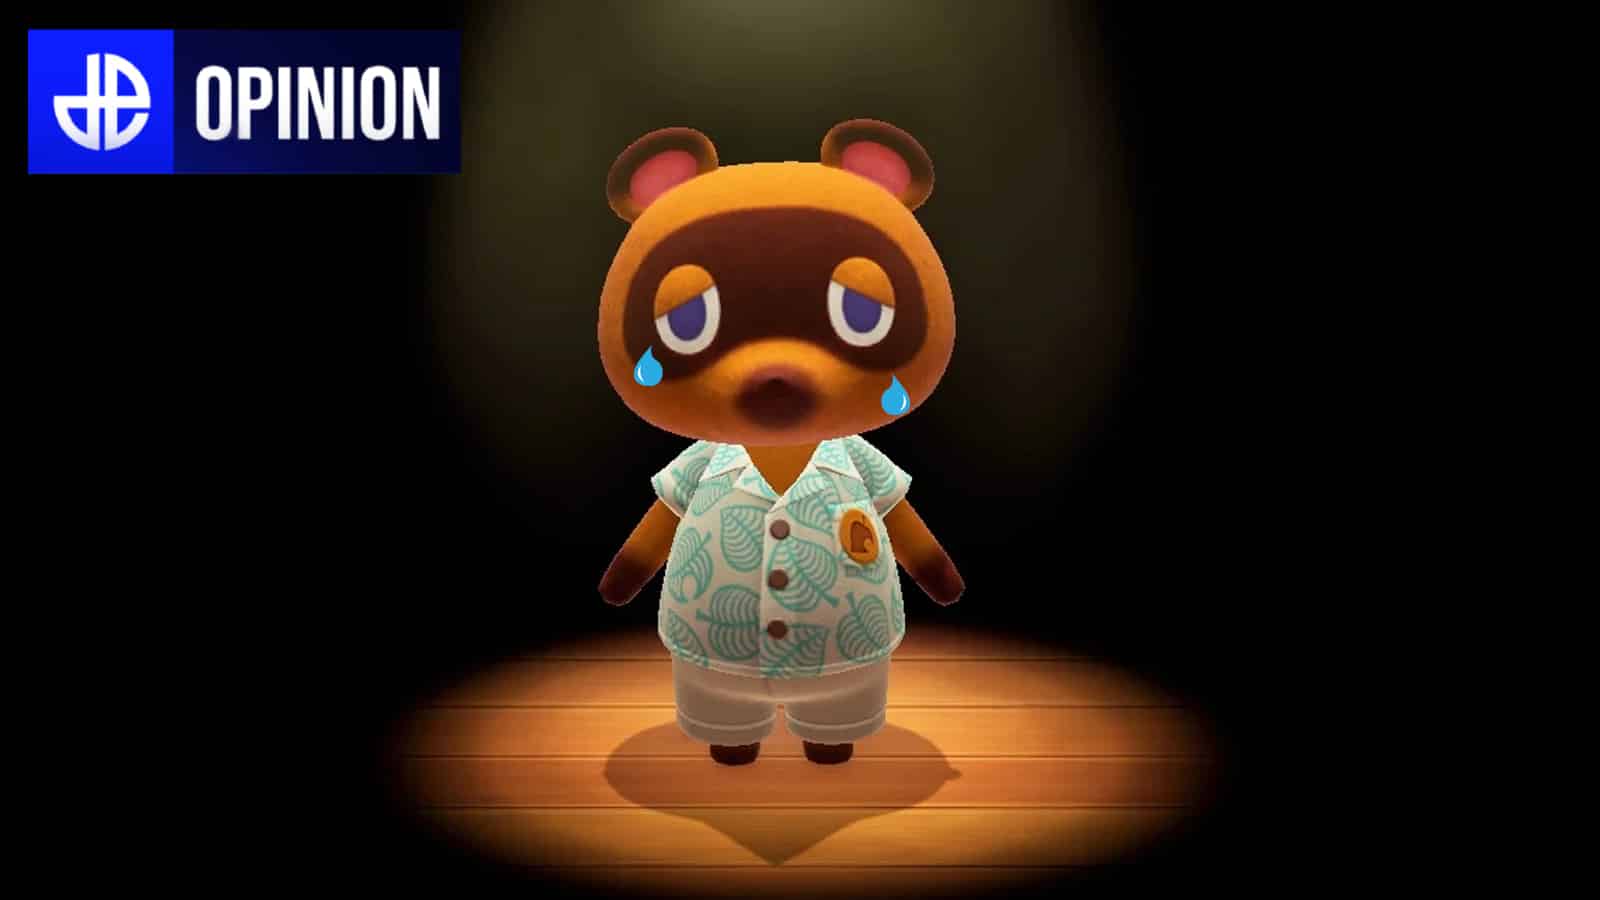 What Is 'Animal Crossing: New Horizons' and How Do You Play It?